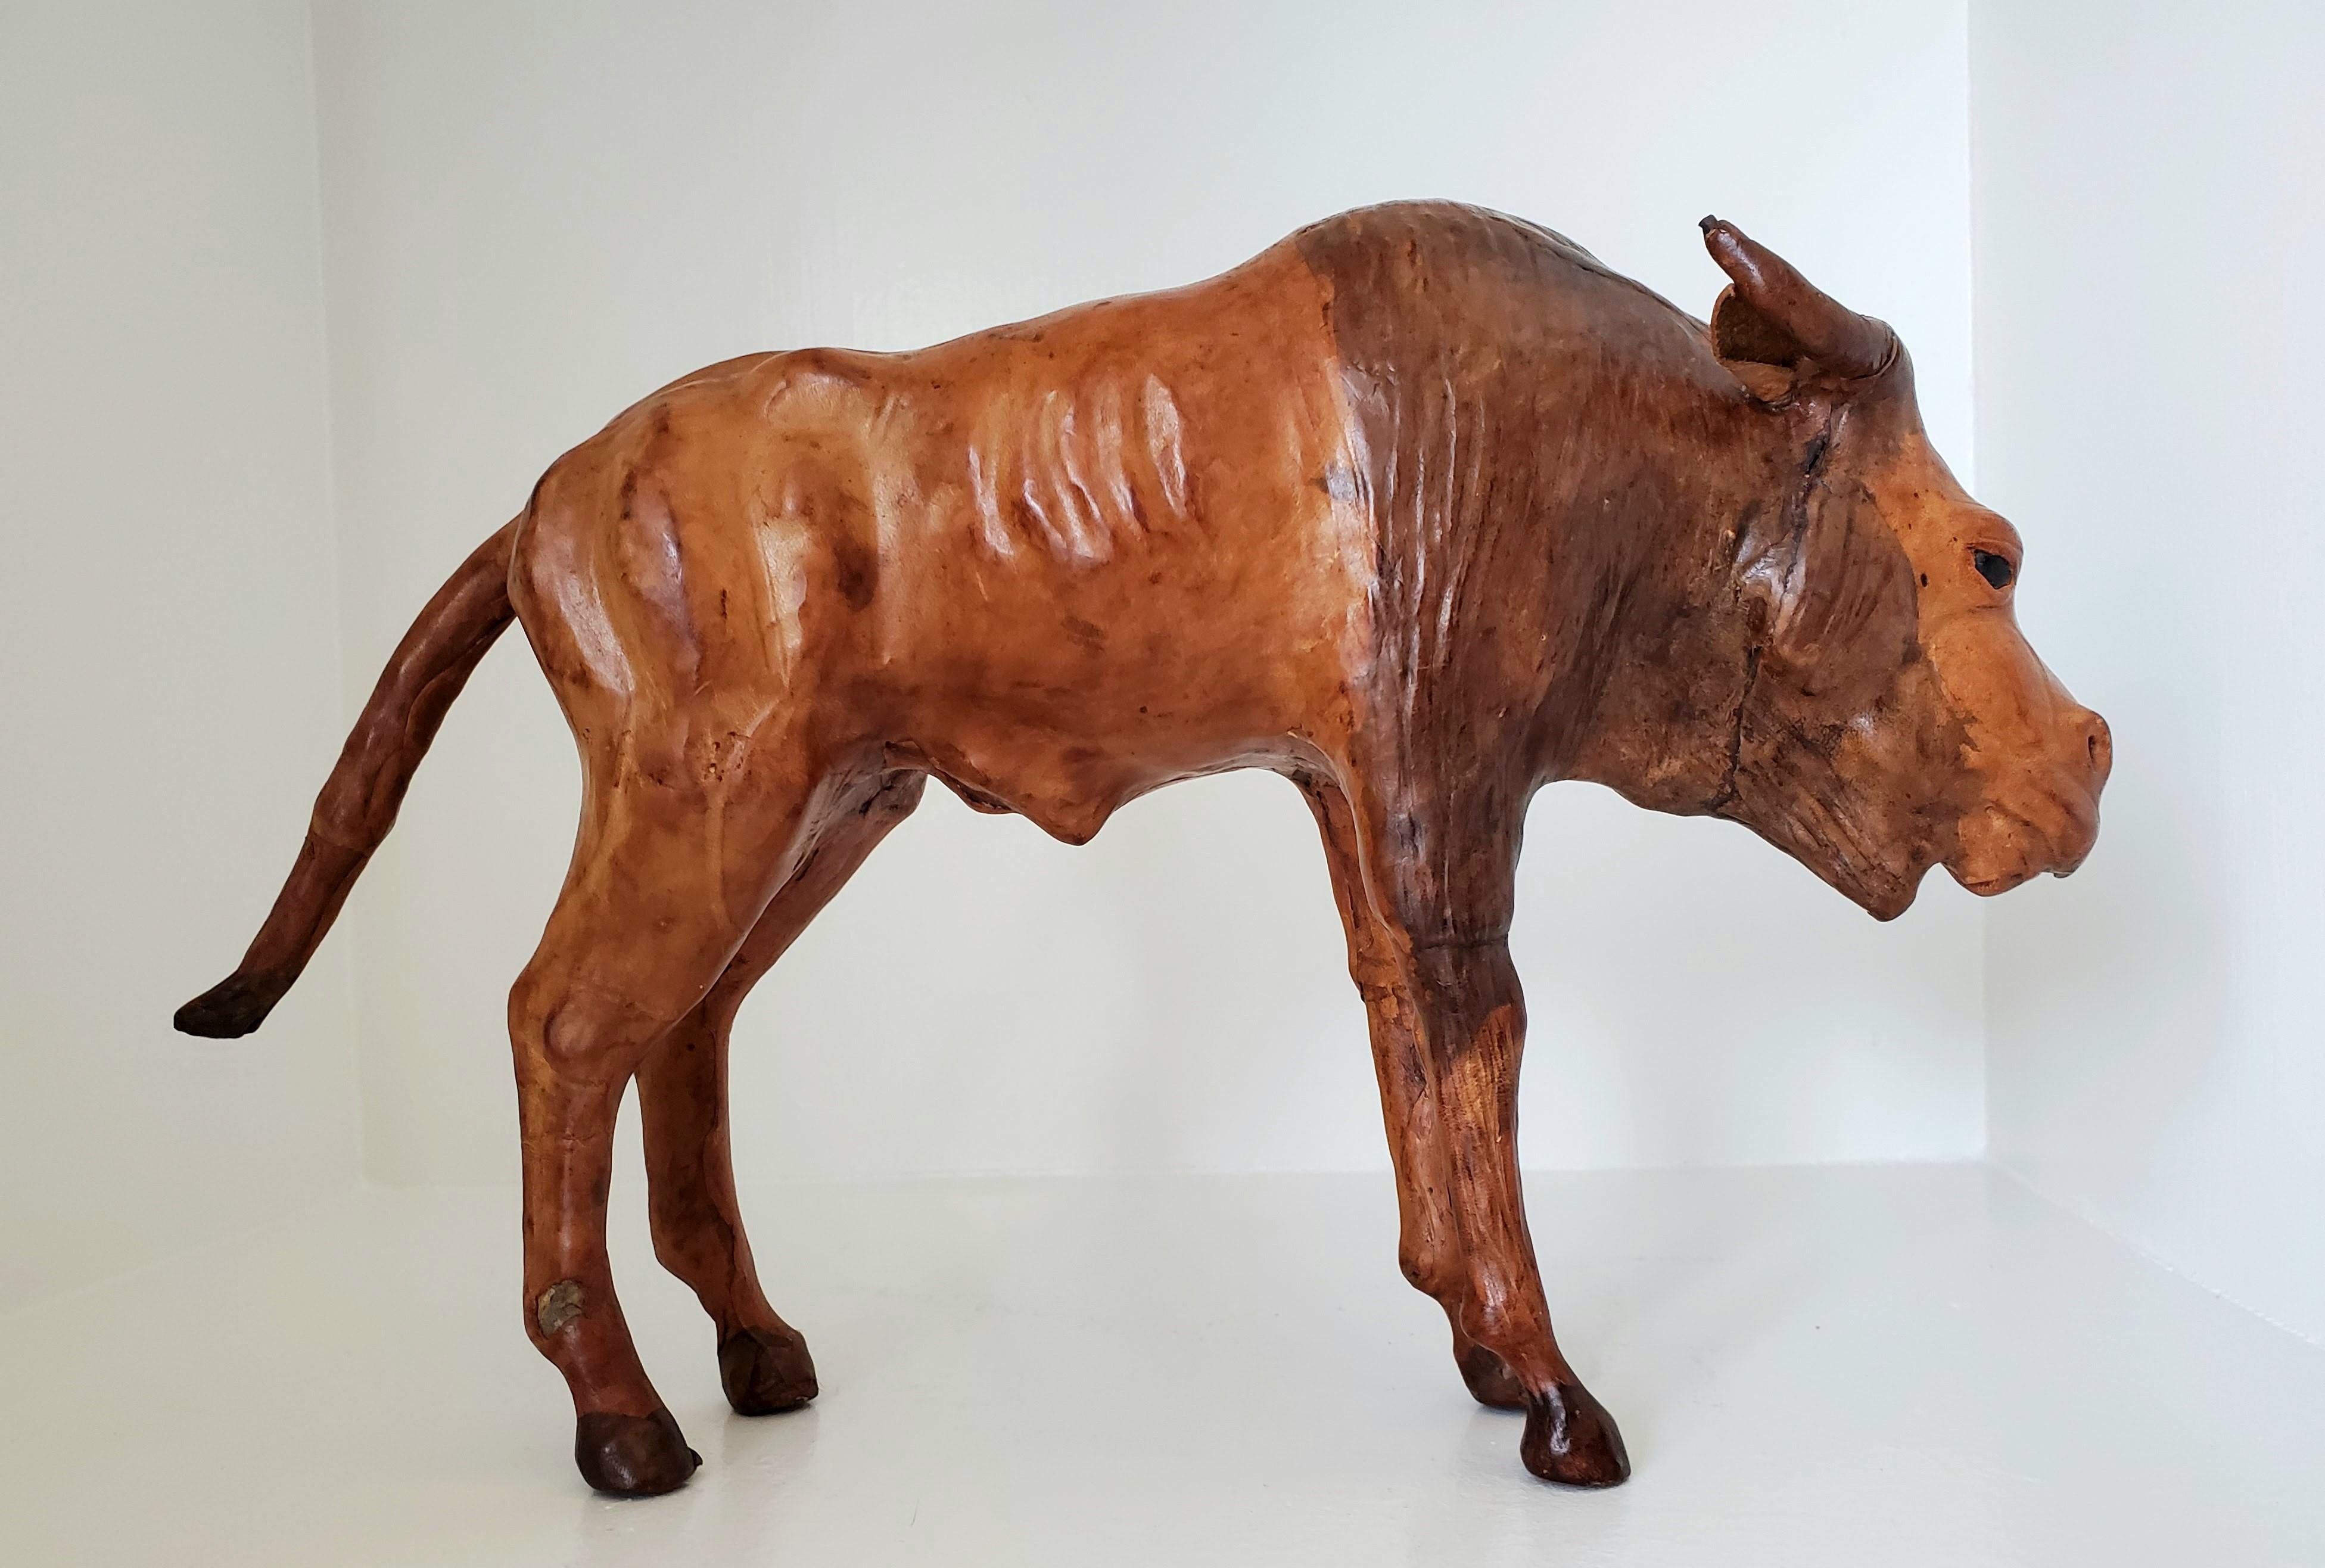 This vintage wood and leather animal sculpture from the early 20th century is likely from Liberty's London. This sculpture, handcarved in wood and clad in leather, depicts a lifelike wildebeest that exudes a sense of dolefulness and is realistic in